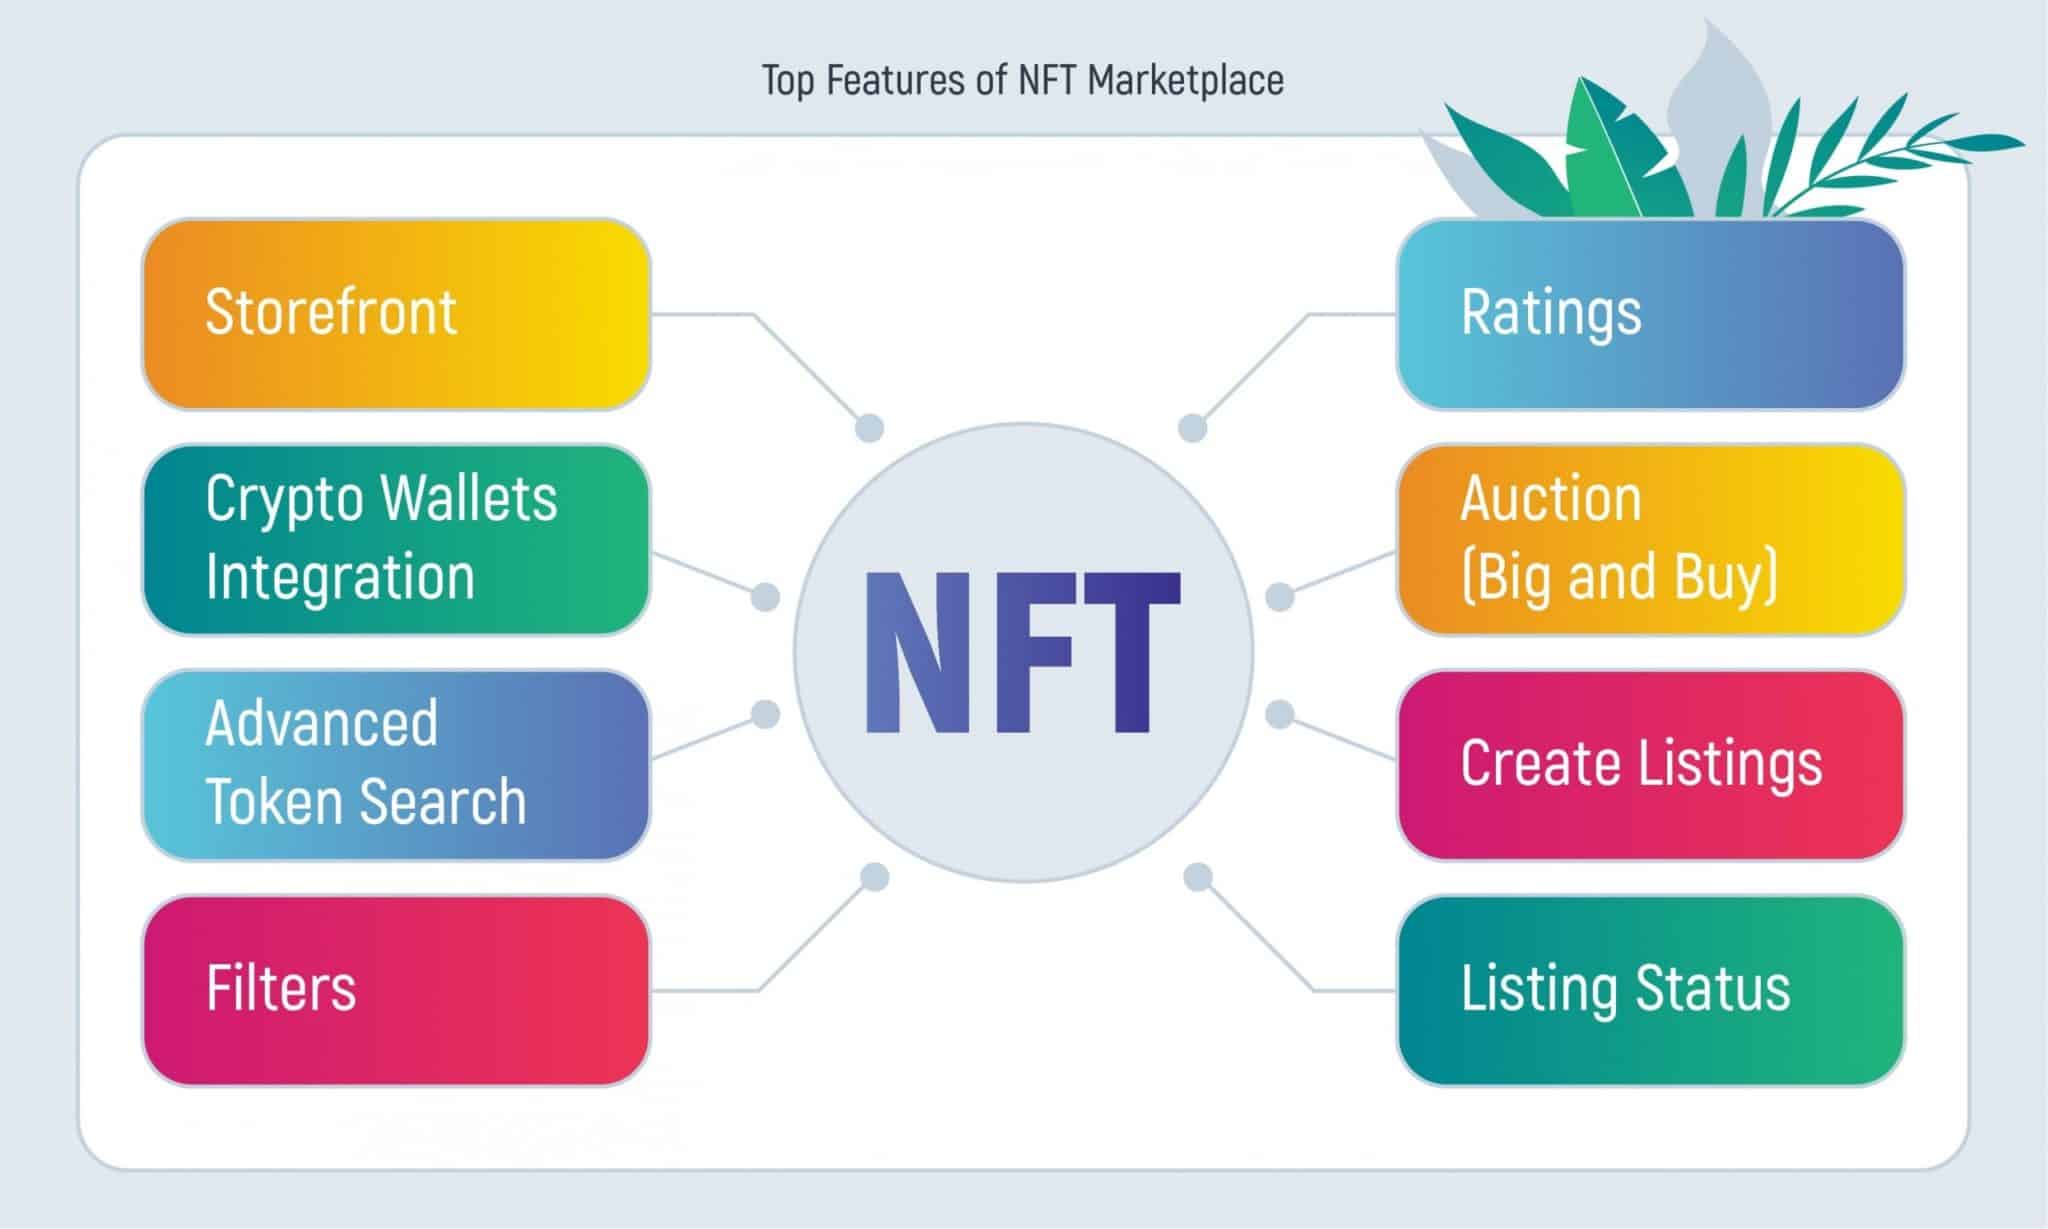 How Much Does It Cost to Create NFT Marketplace?